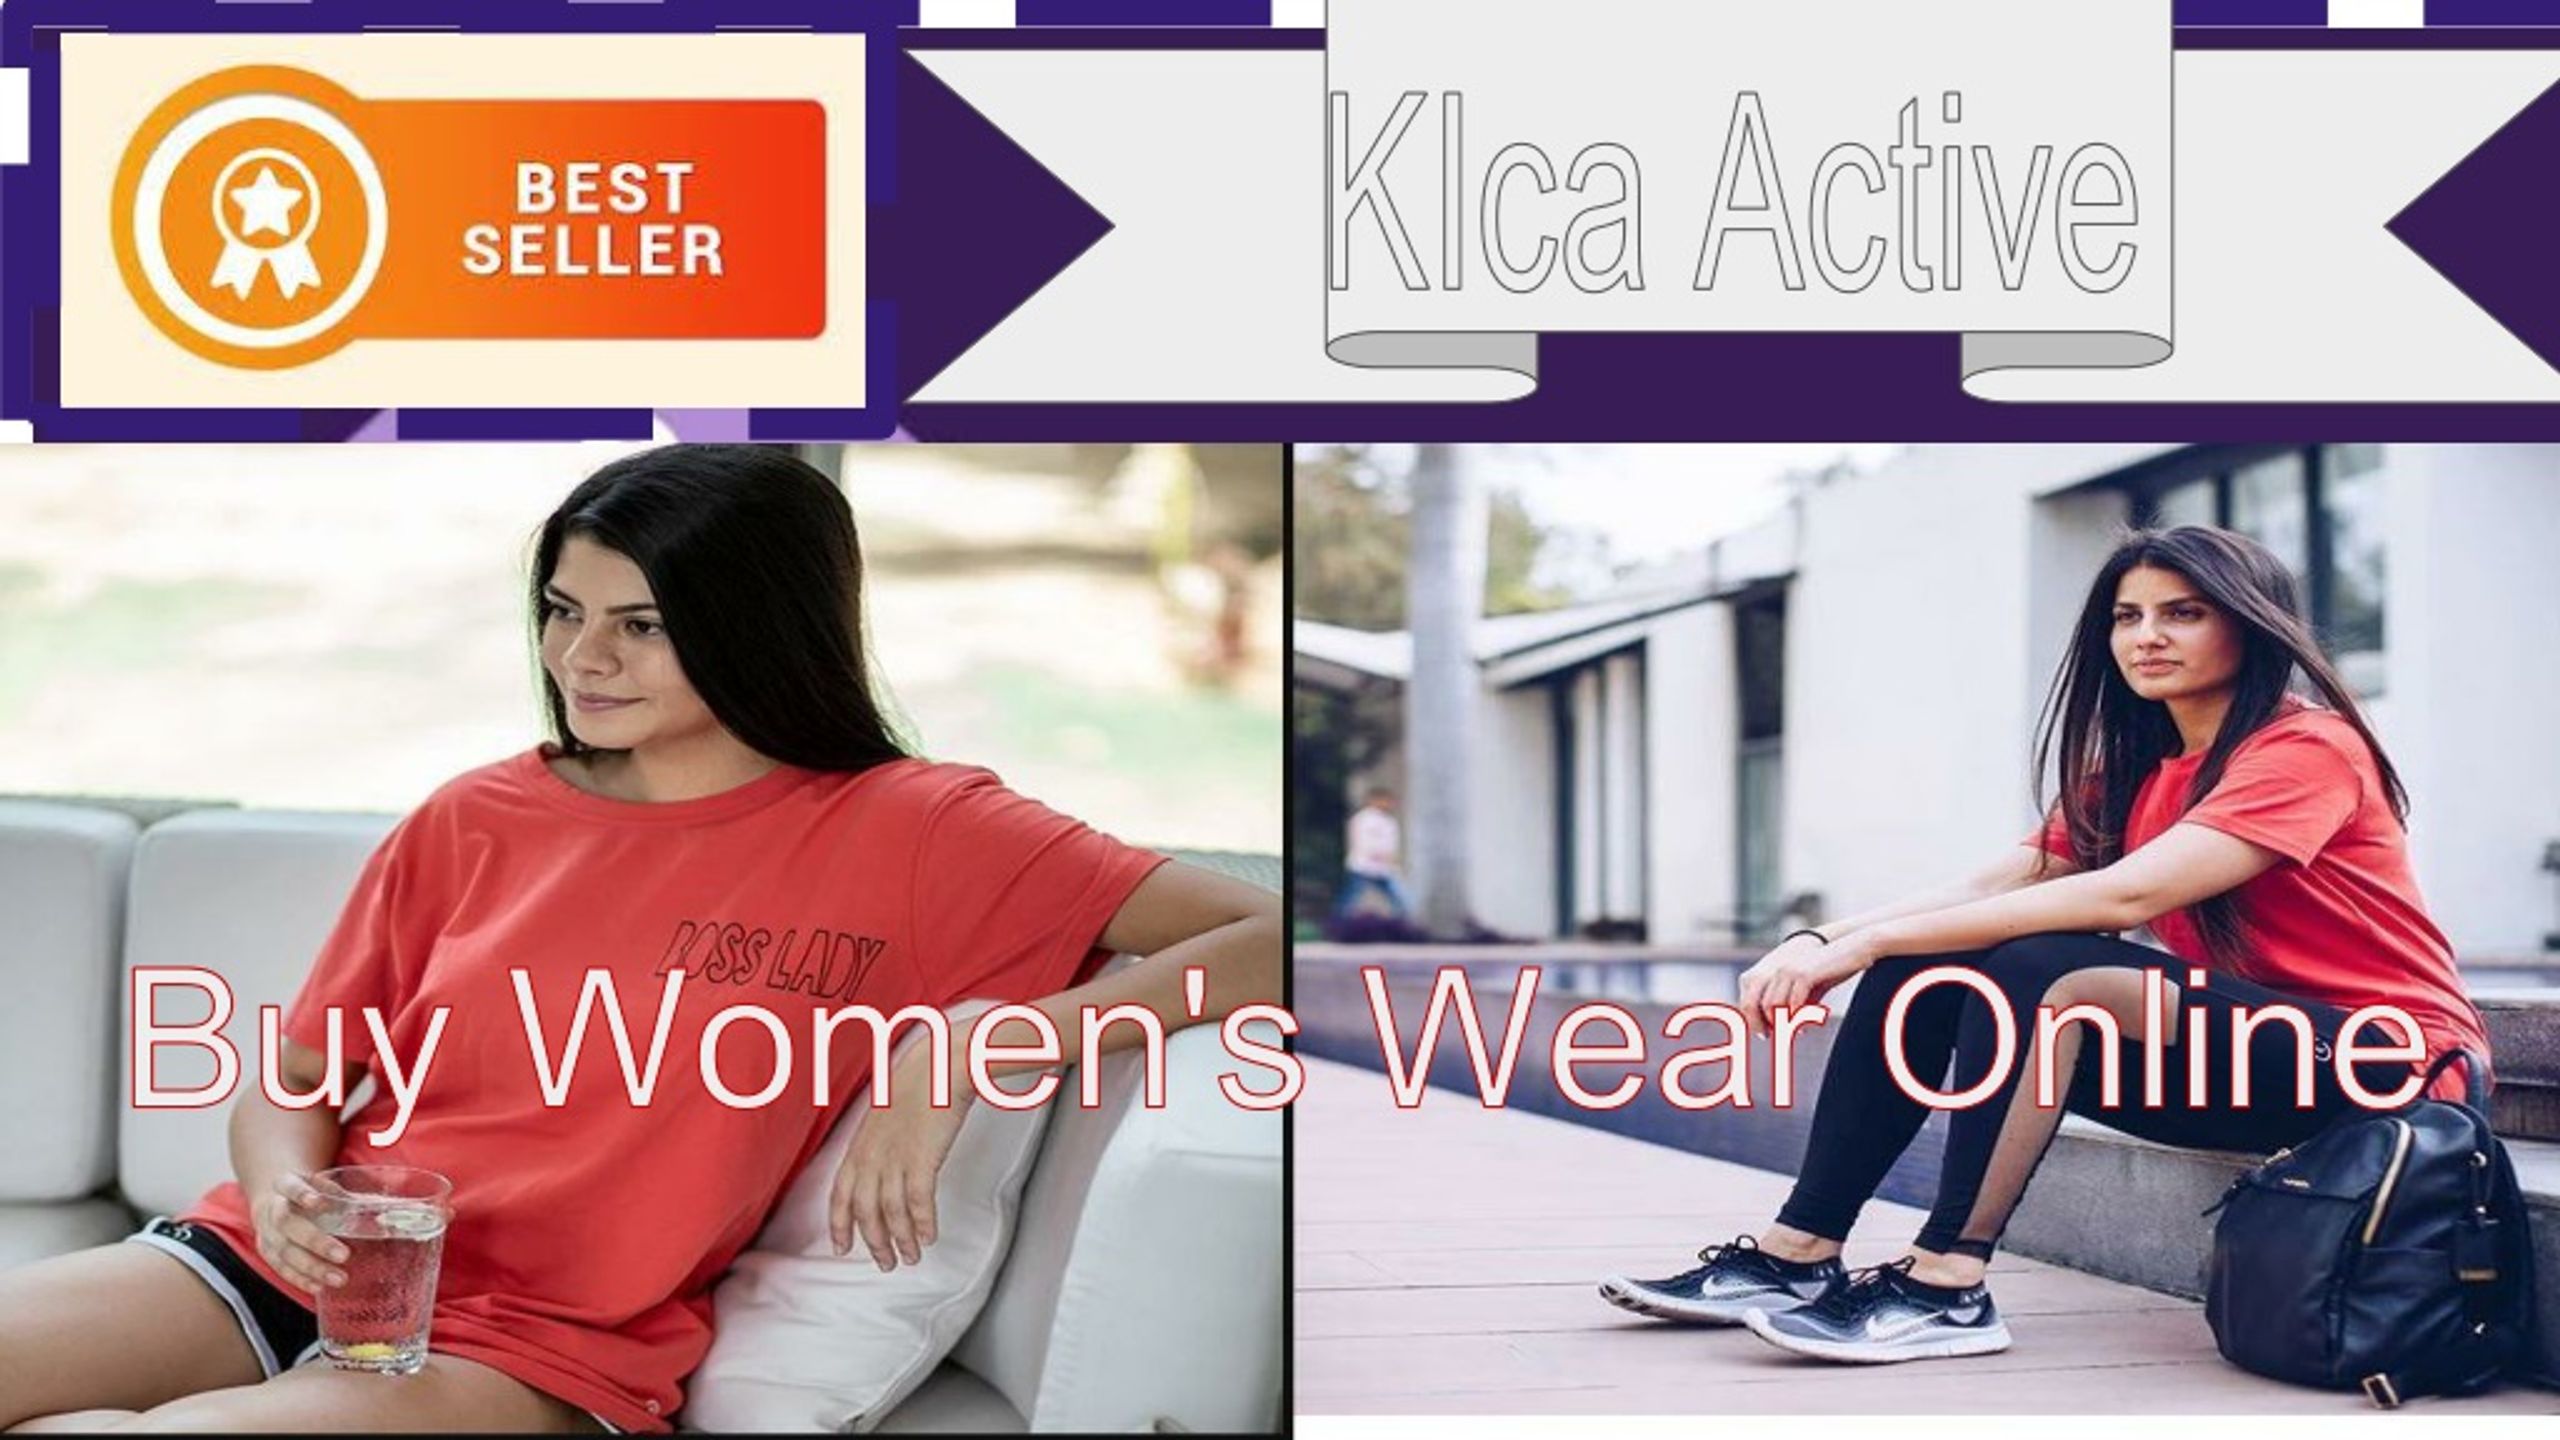 PPT - Workout Clothes For Women At Kica Active : Women's Activewear Online  PowerPoint Presentation - ID:8867829